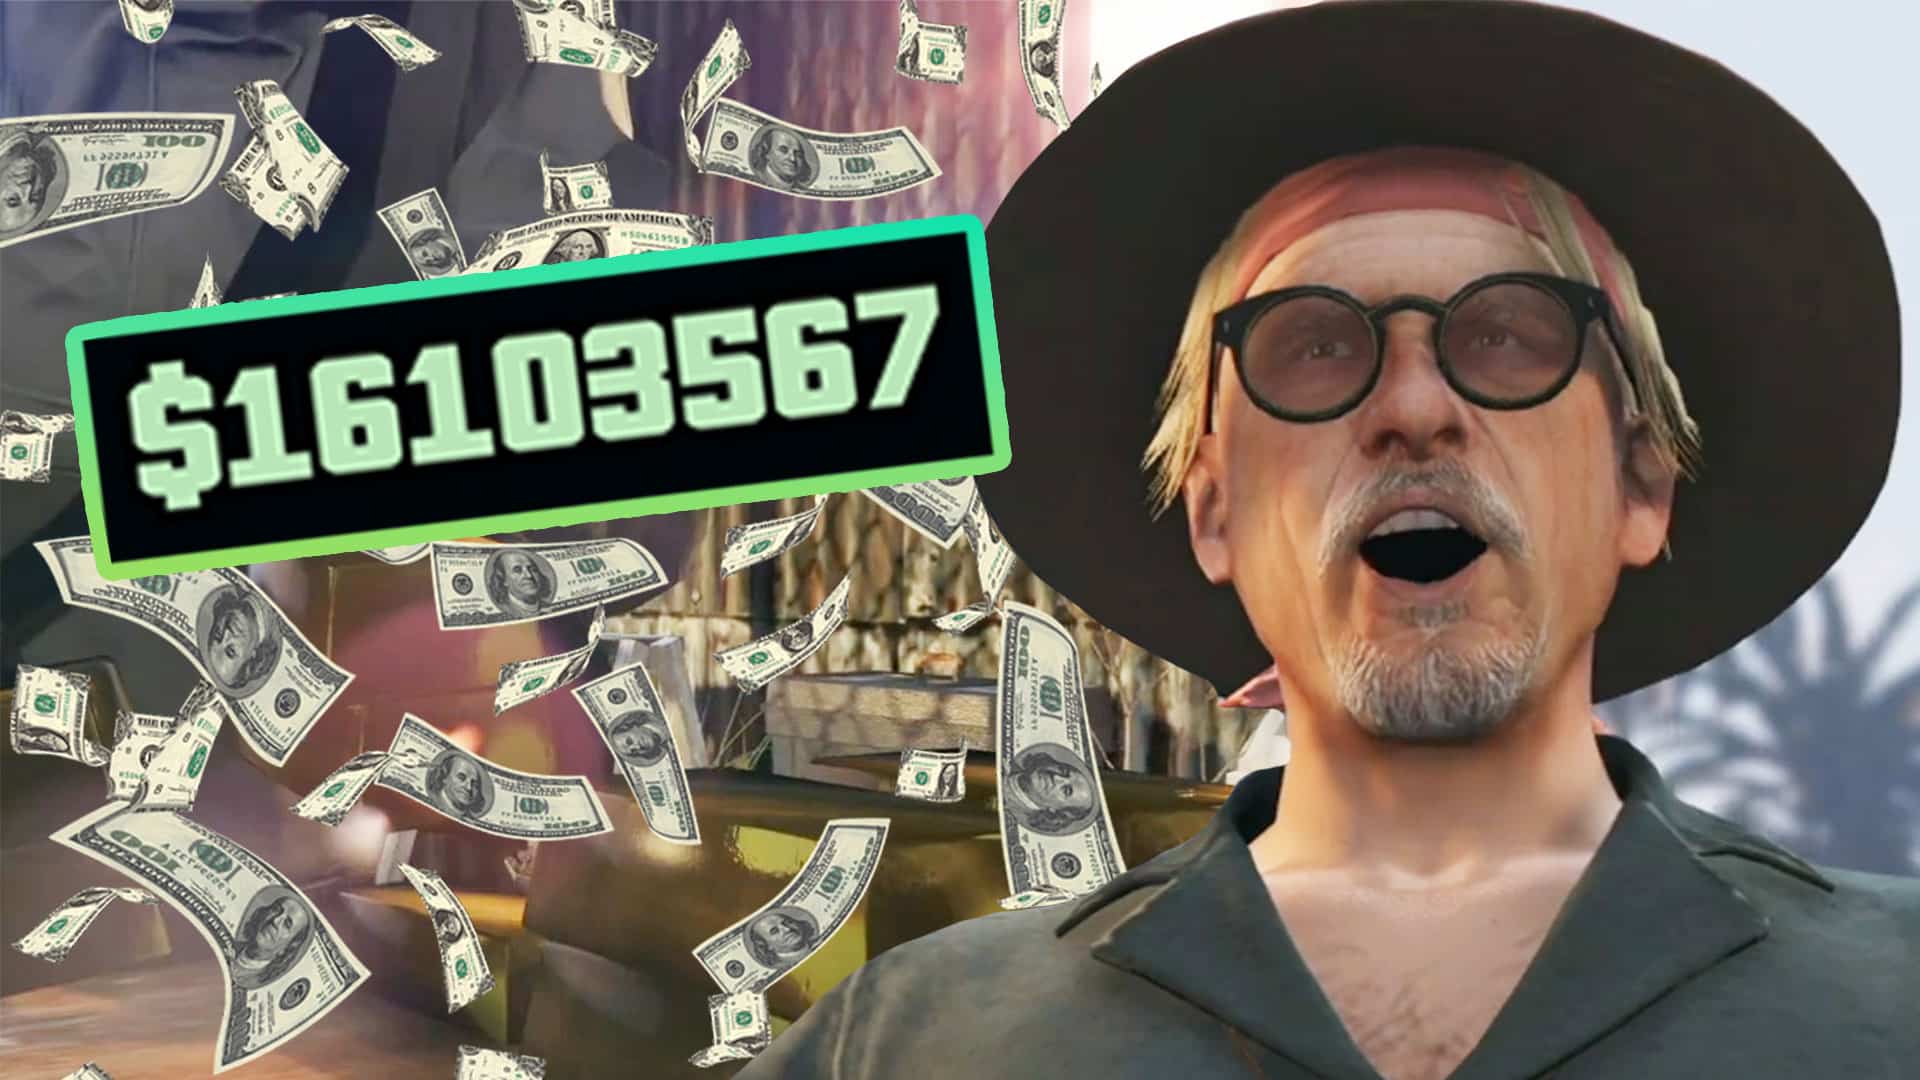 Rockstar nerfs how you've been able to make money fastest in GTA Online so far - fans are disappointed